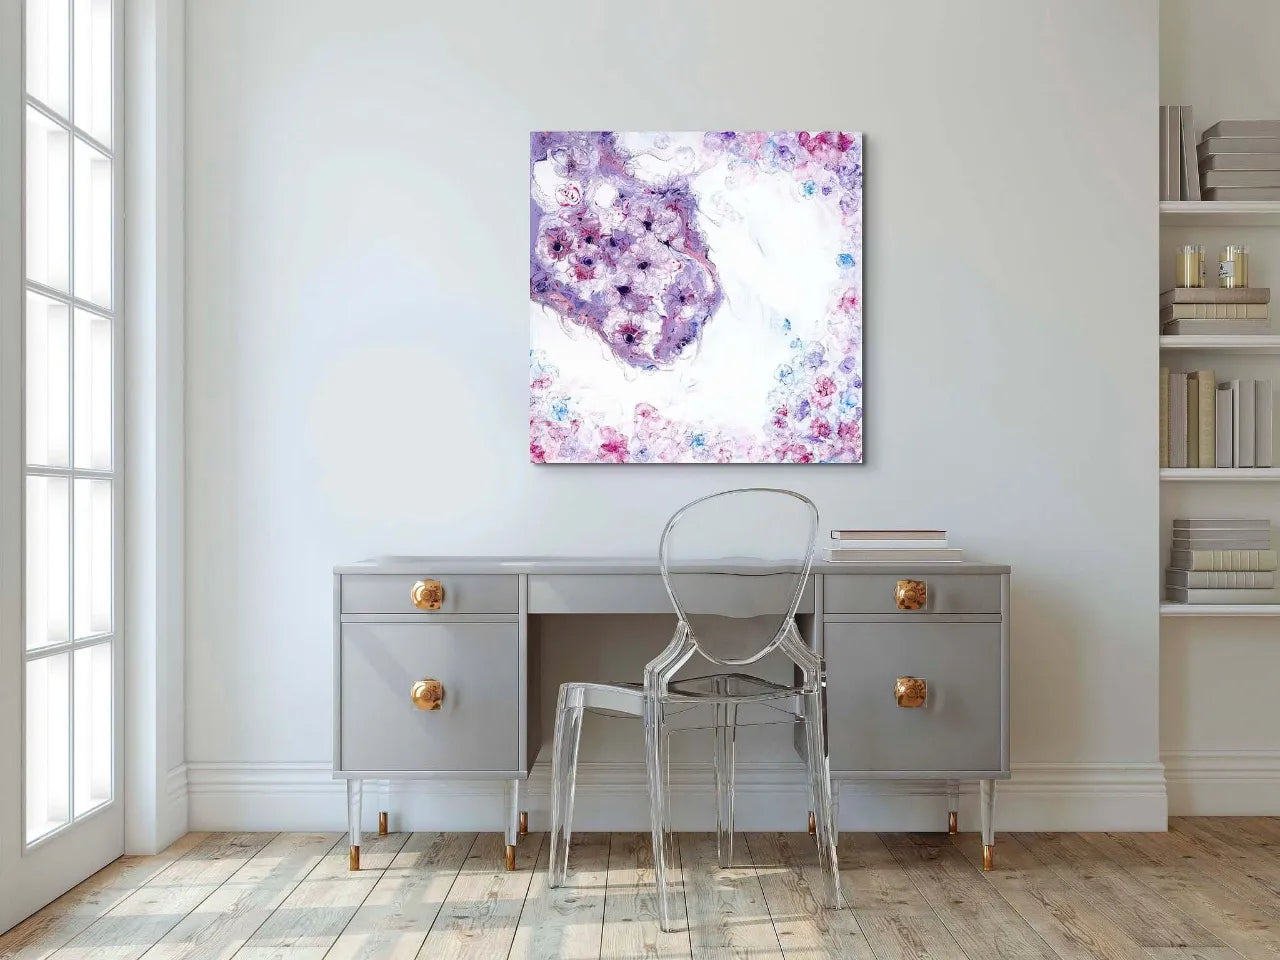 Abstract-Artwork-by-Sung-Lee-Nature-Series-Jacaranda-One-Desk-Original-Painting-on-Canvas